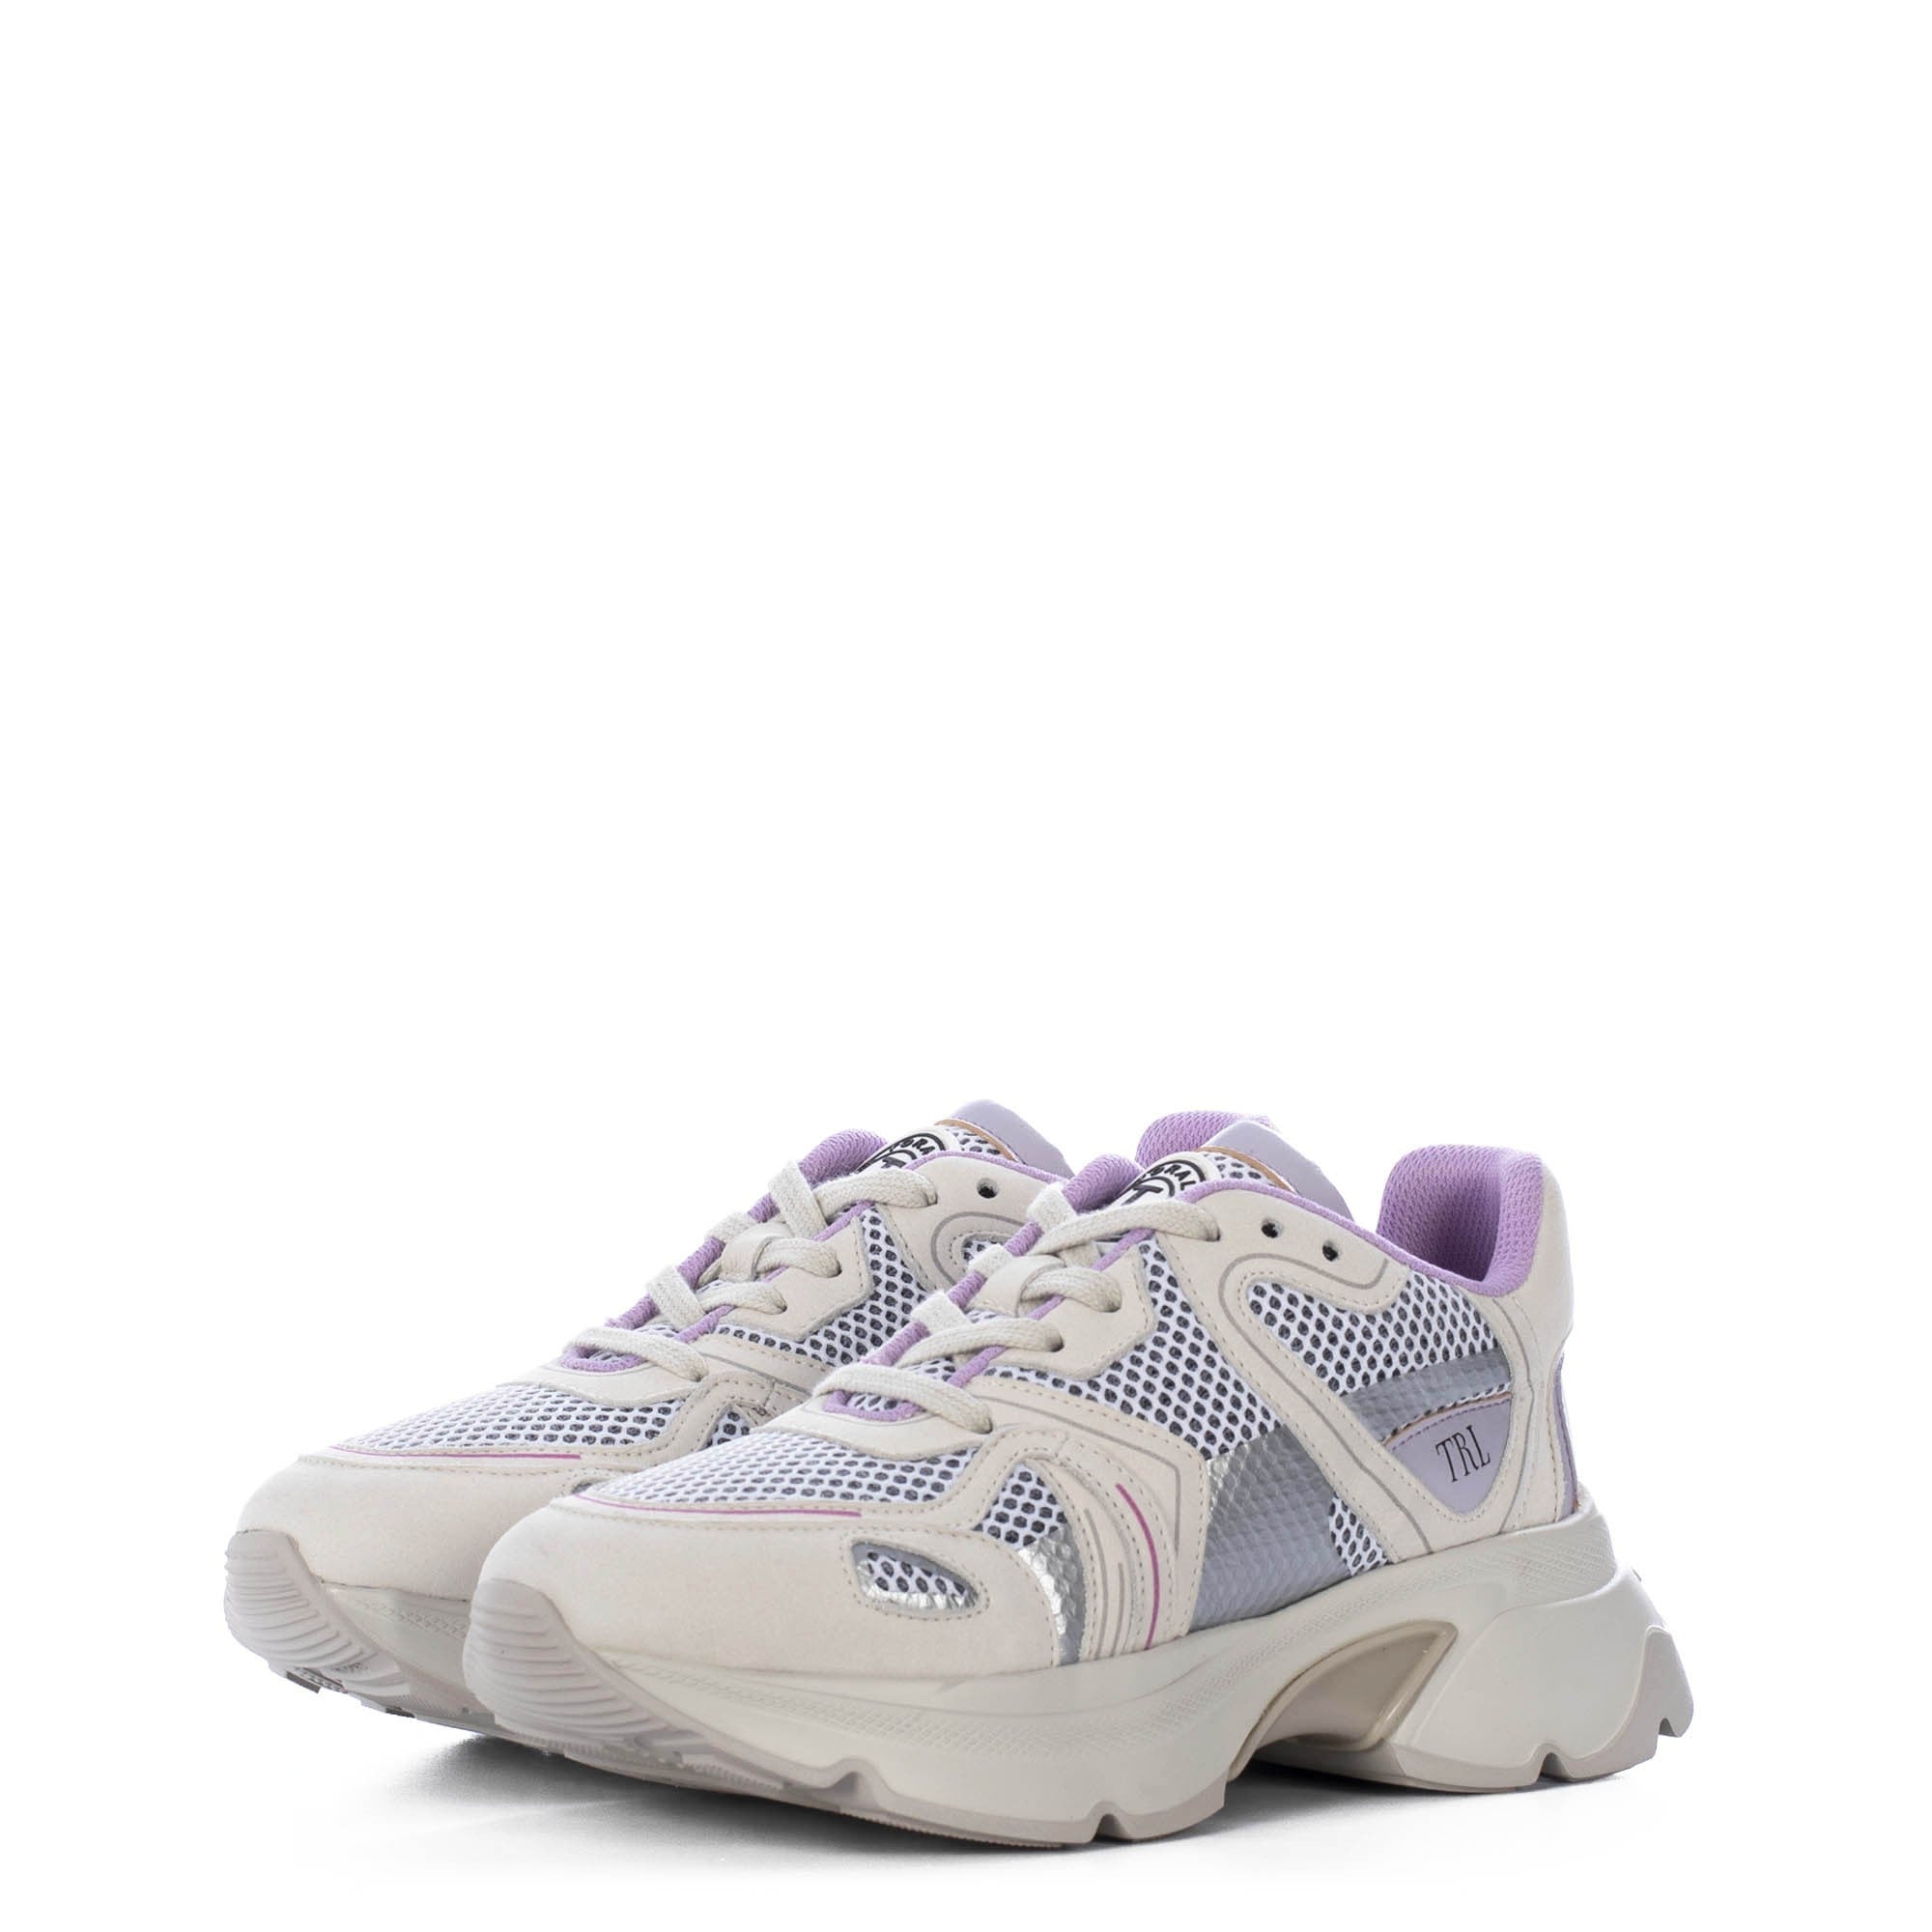 TORAL RUNNER 9 BEIGE AND MAUVE SNEAKERS (6942835736716)